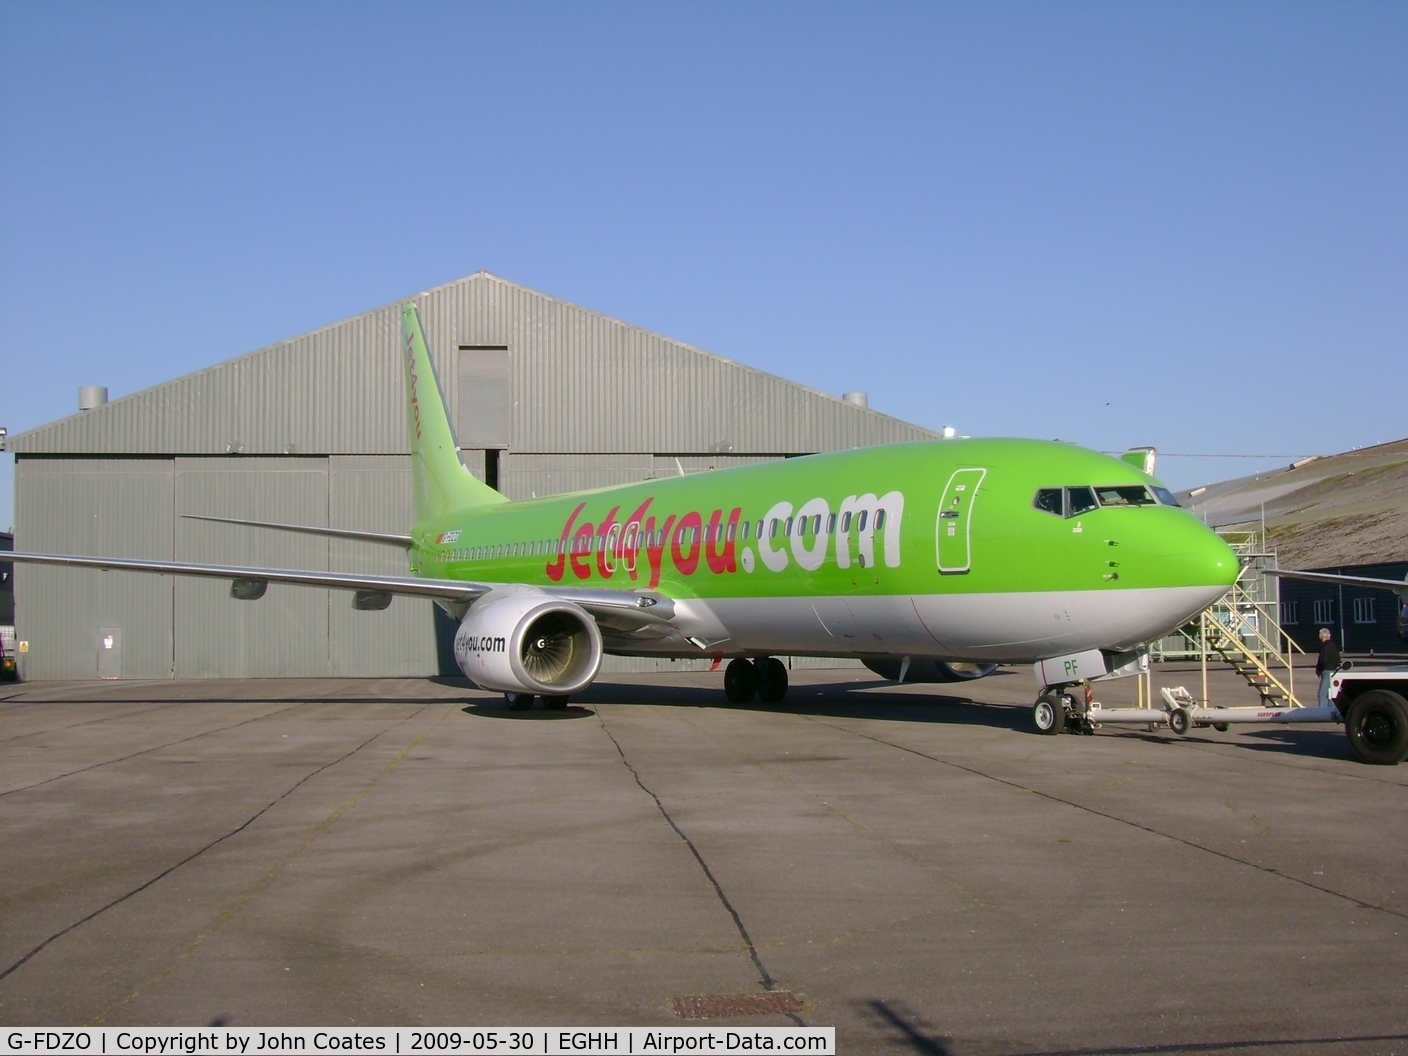 G-FDZO, 2007 Boeing 737-8K5 C/N 34691, Awaiting delivery after respray